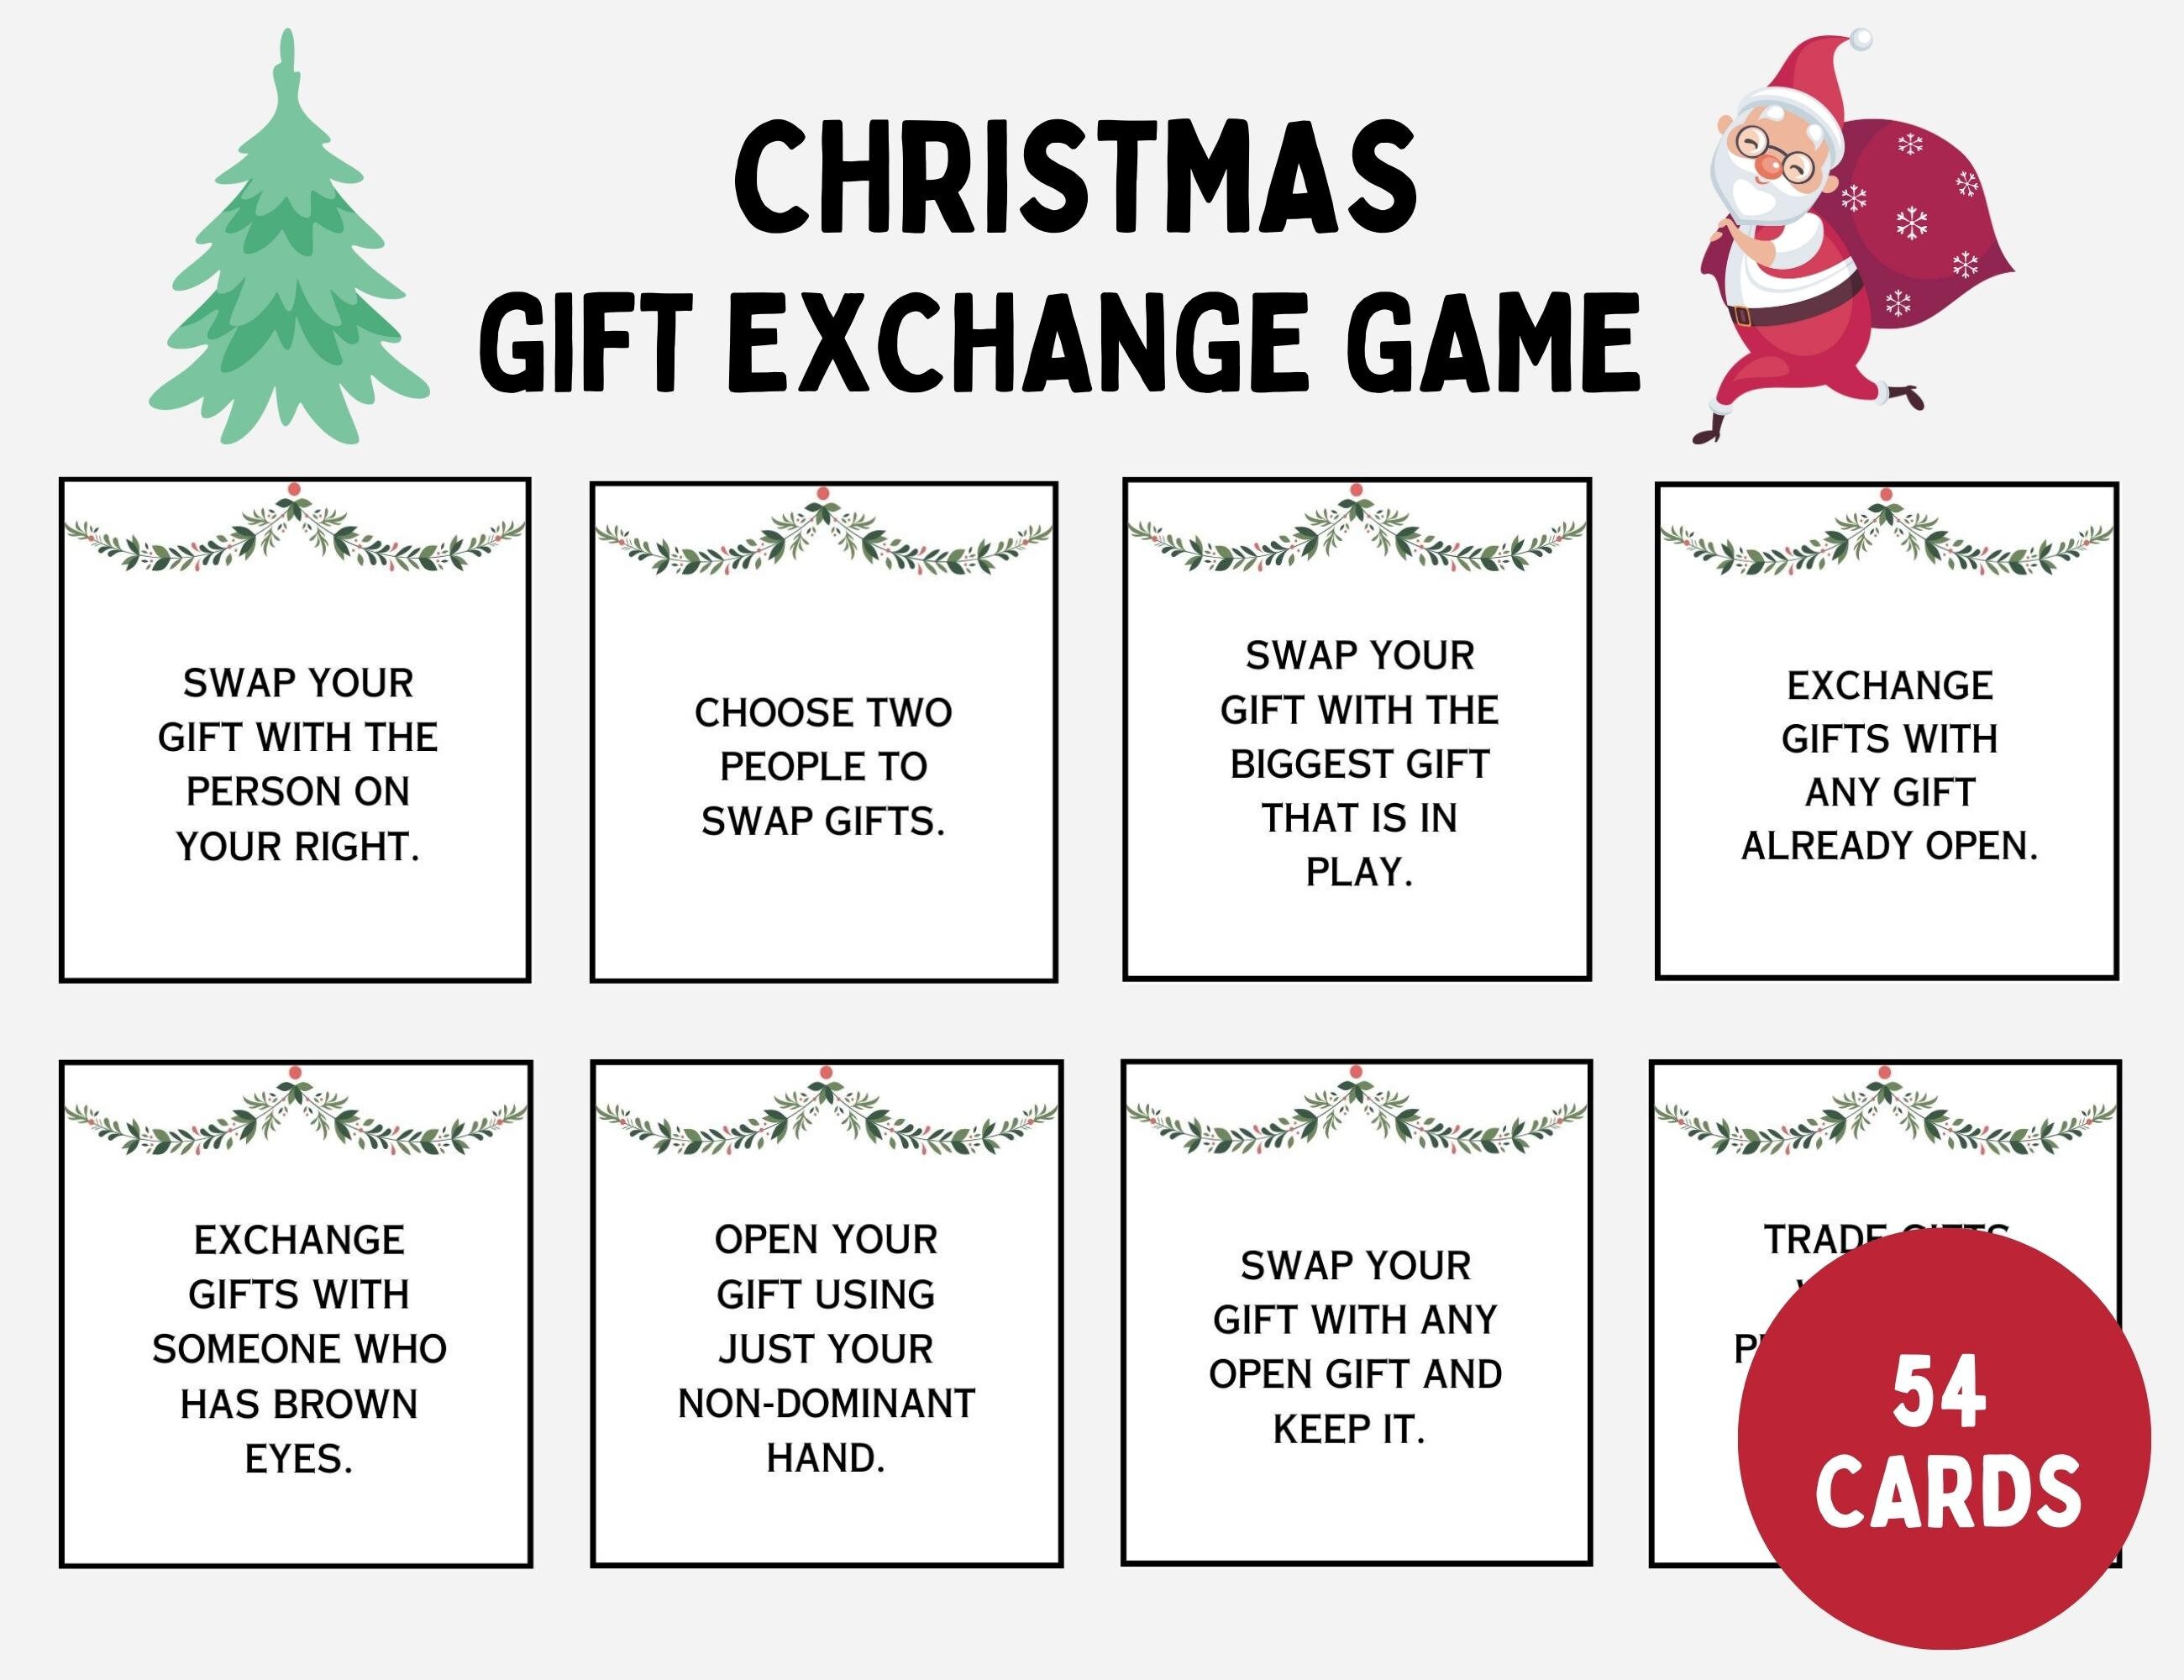 8 Christmas Gift Exchange Games for a Holly Jolly Present Swap